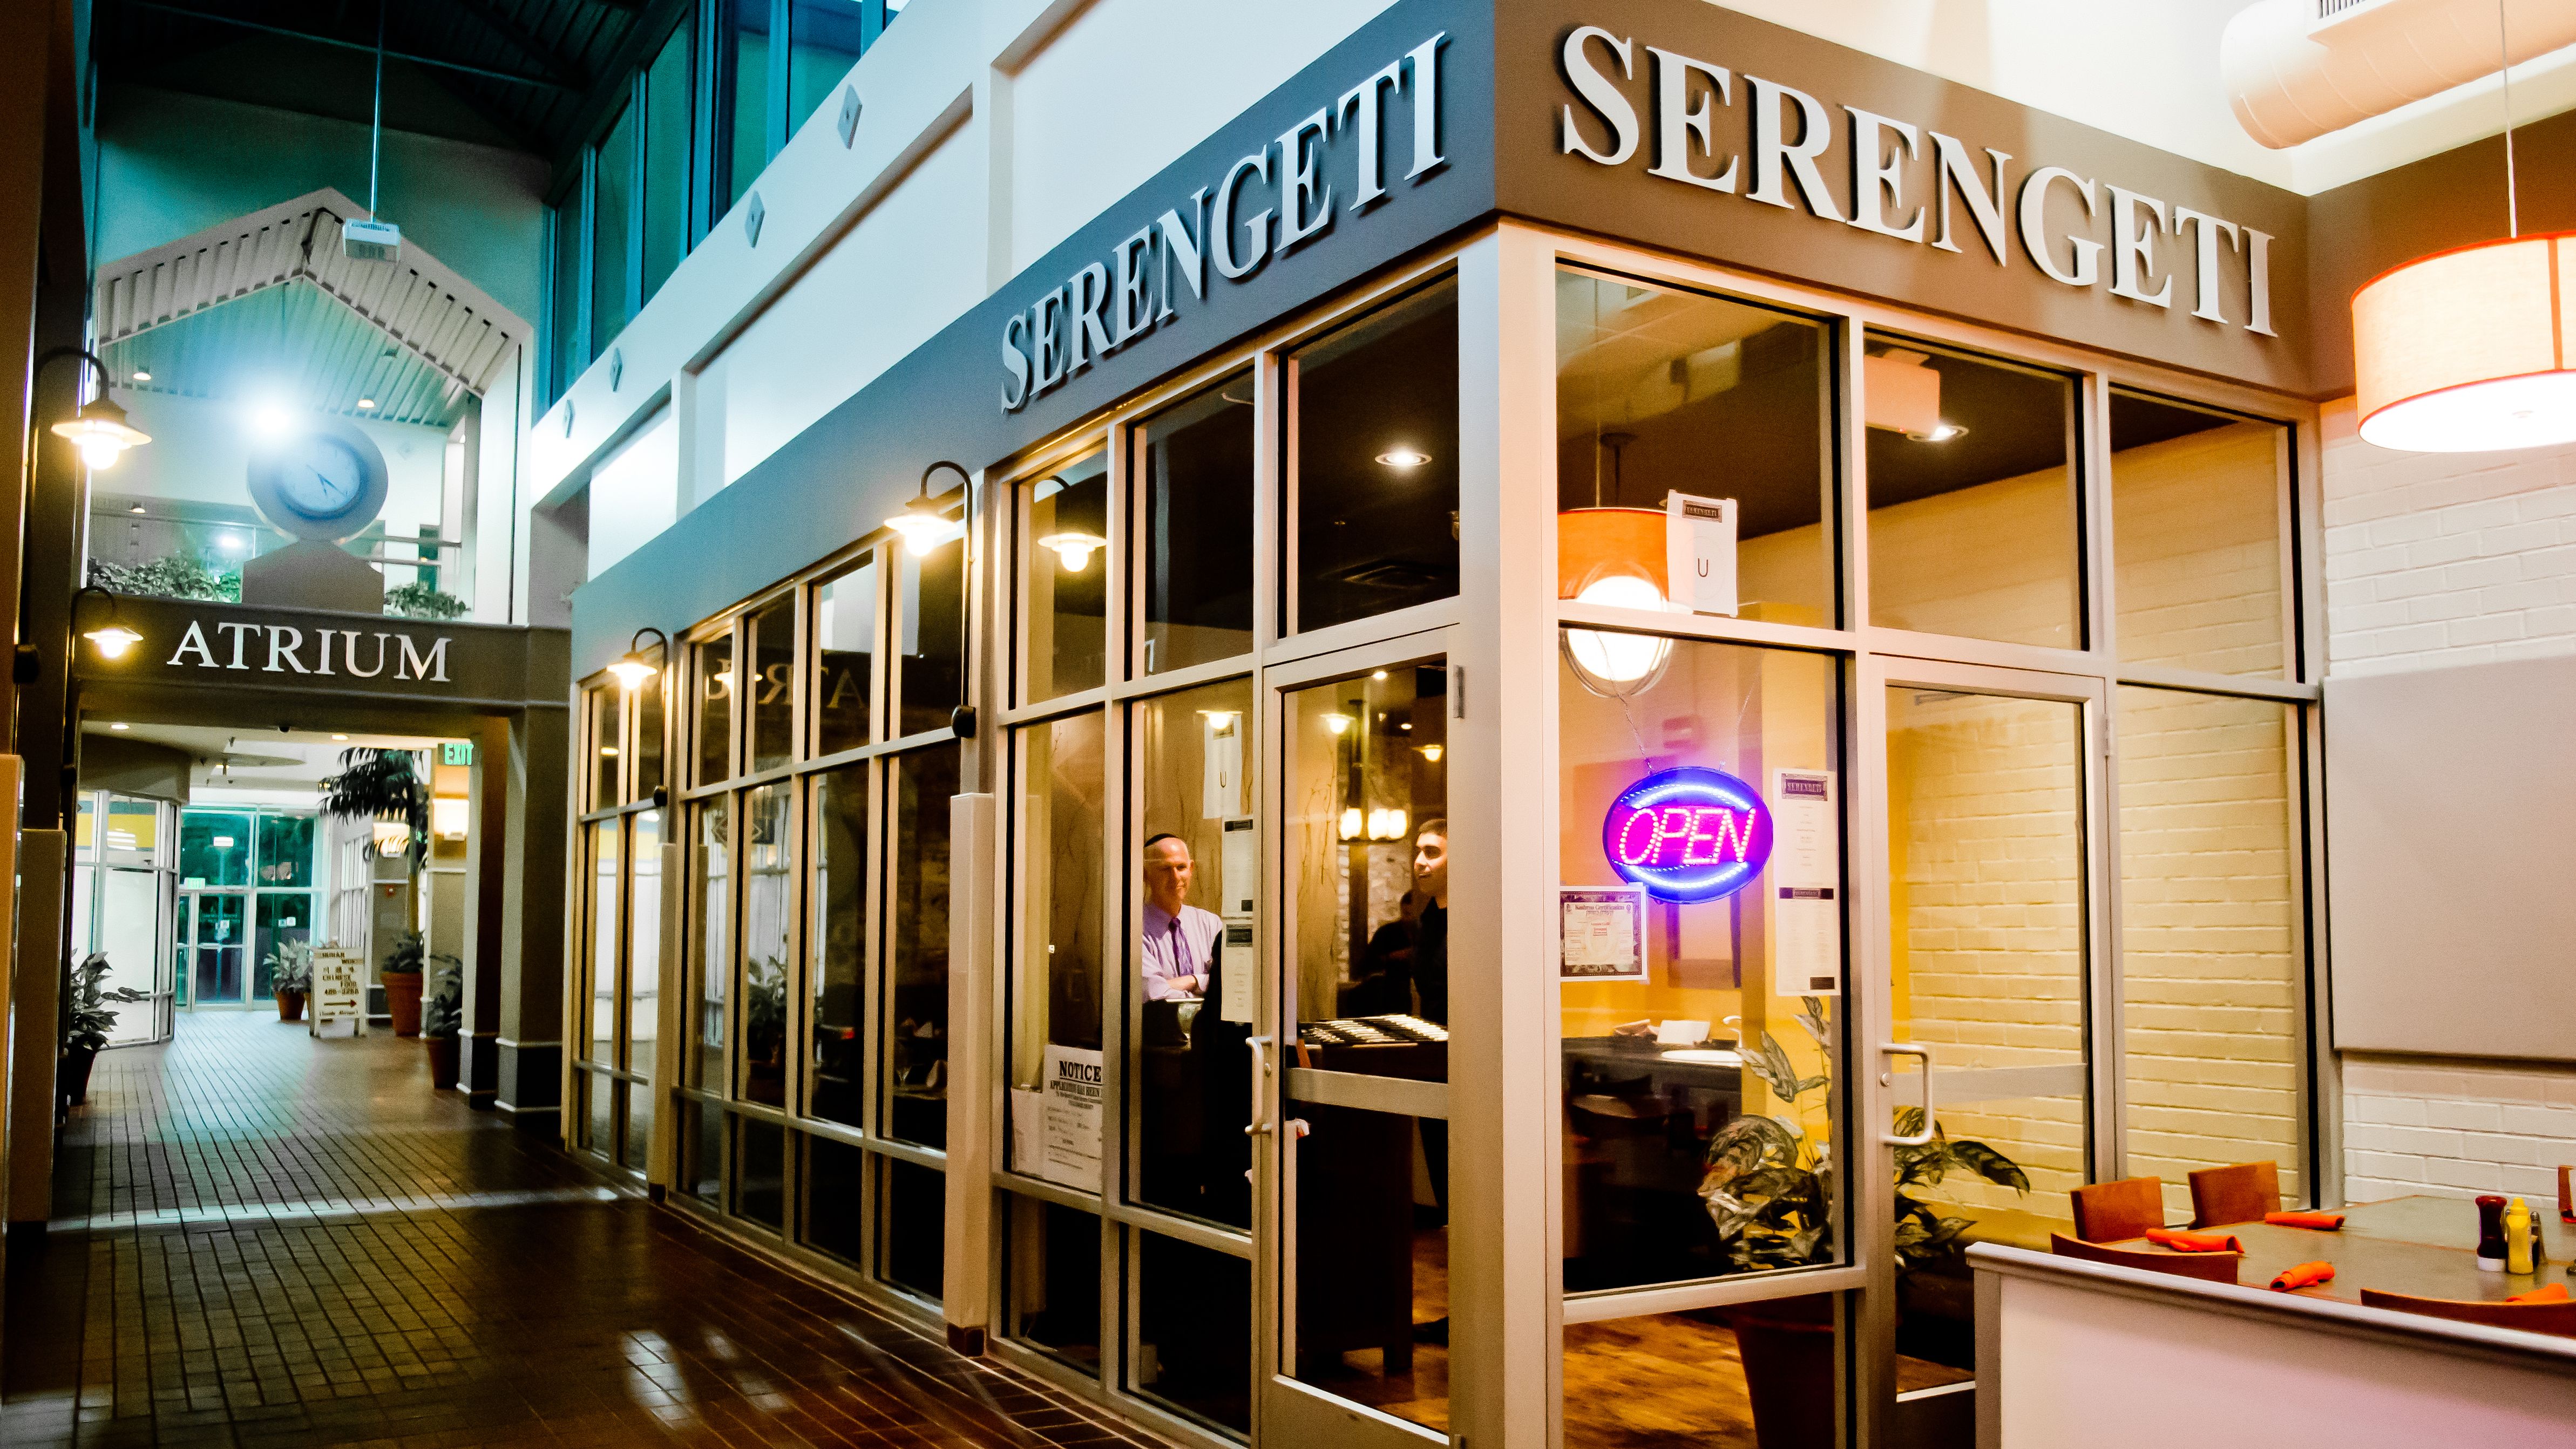 Serengeti Restaurant in Baltimore draws from African flavors.